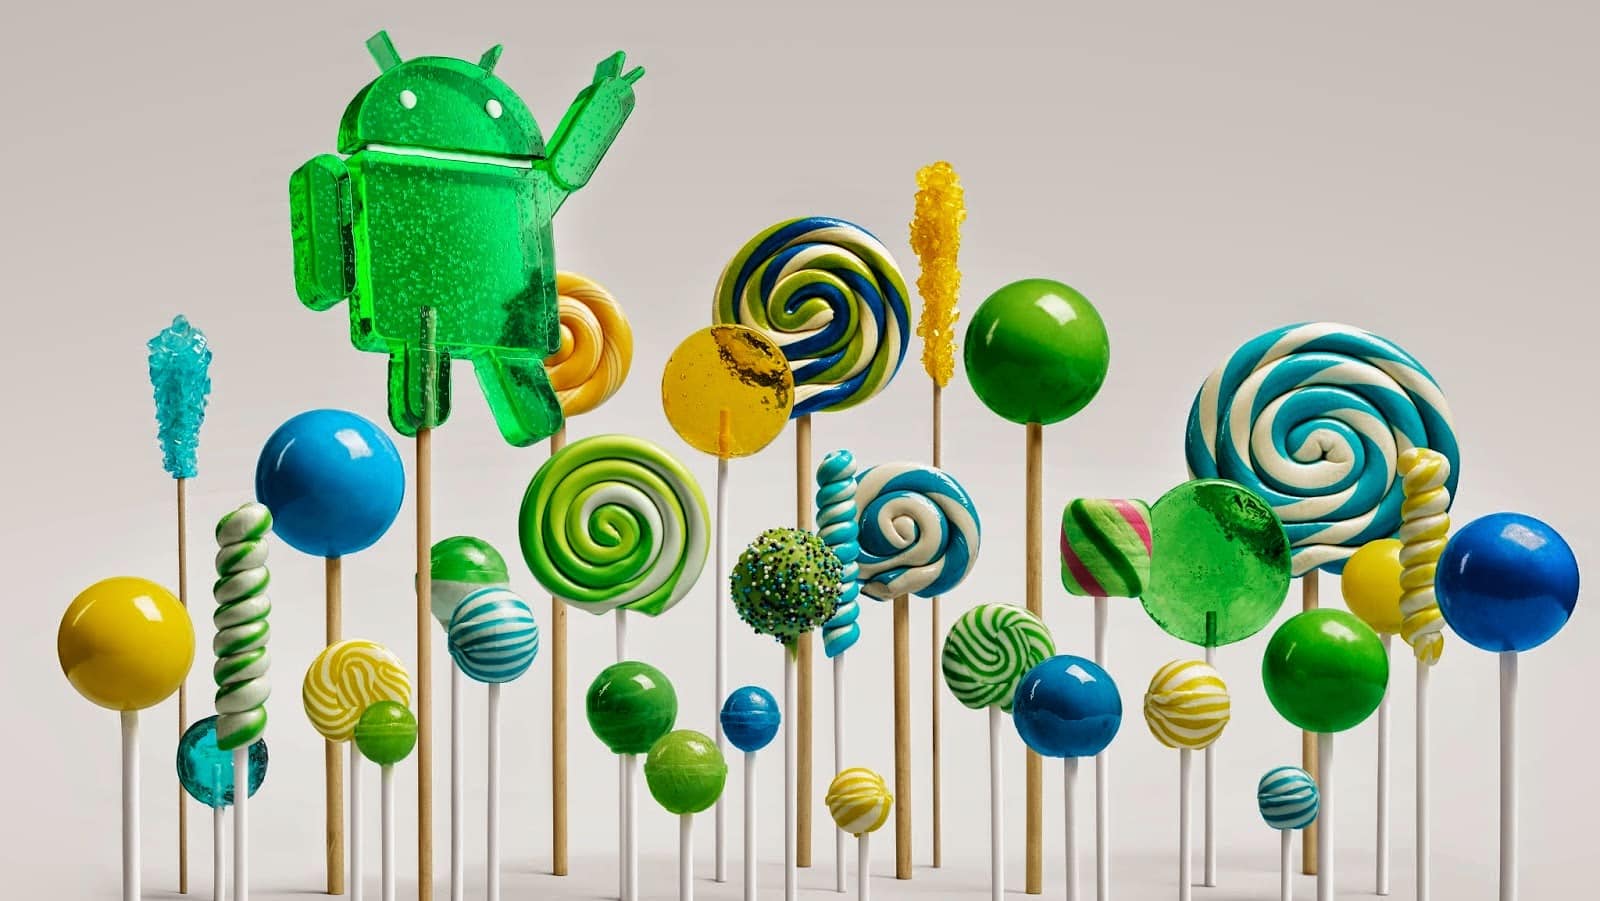 Android 5.0 Lollipop featured image. Credit to Google official blogspot 